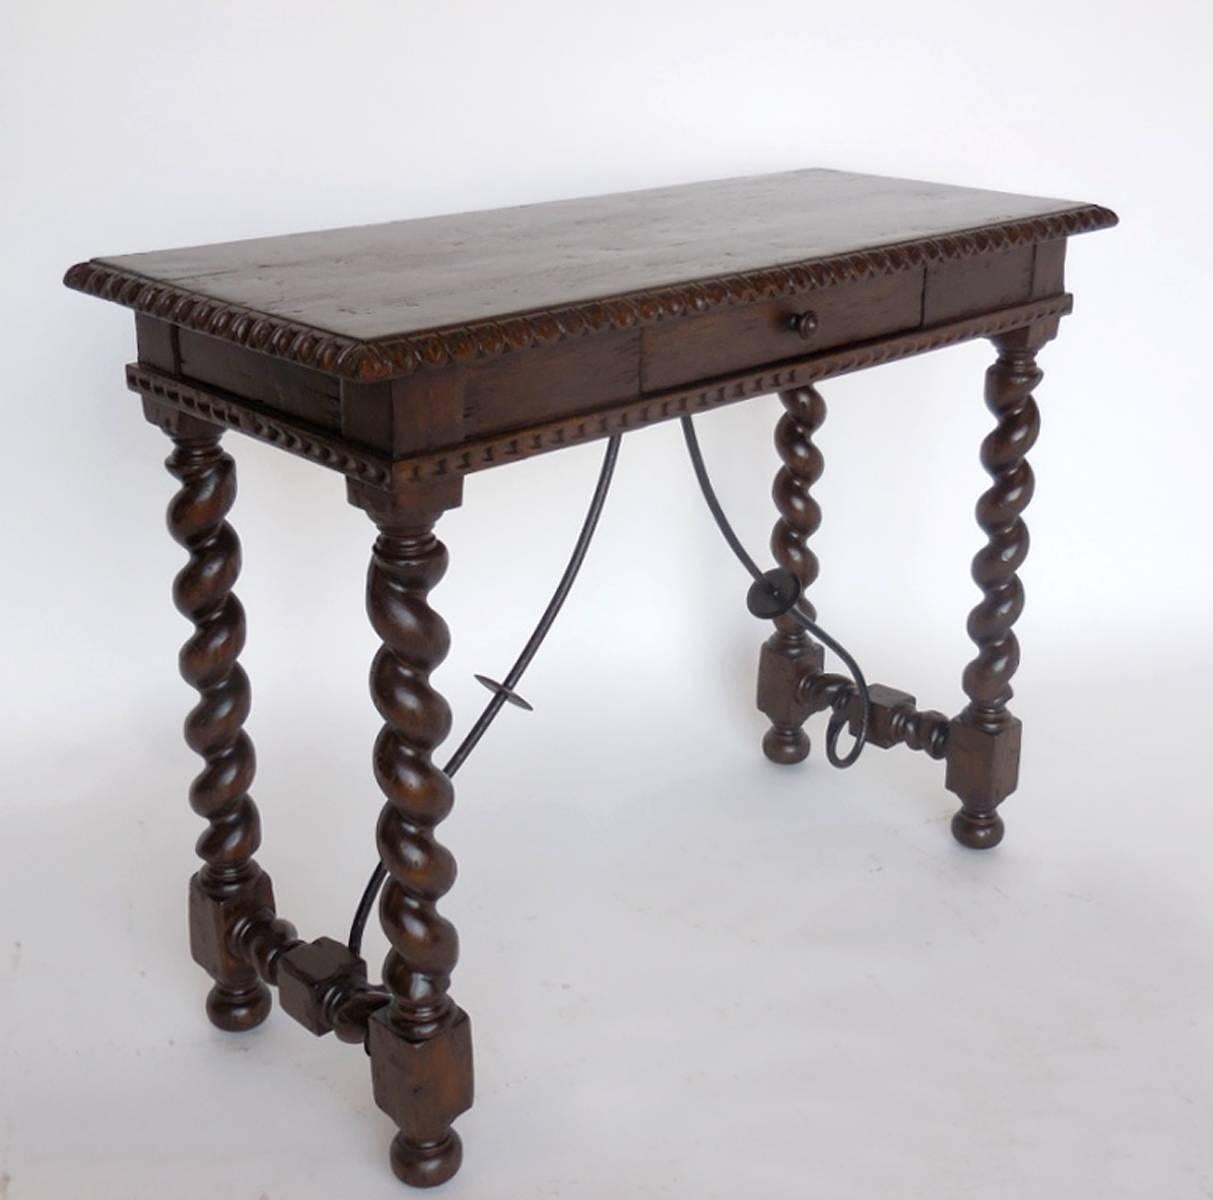 Small scale, petite writing desk with barley twist legs, carved edge and apron detail as well as hand forged iron stretchers. As shown, in Walnut with a medium distress. Can be made in custom sizes and finishes. Made in Los Angeles by Dos Gallos